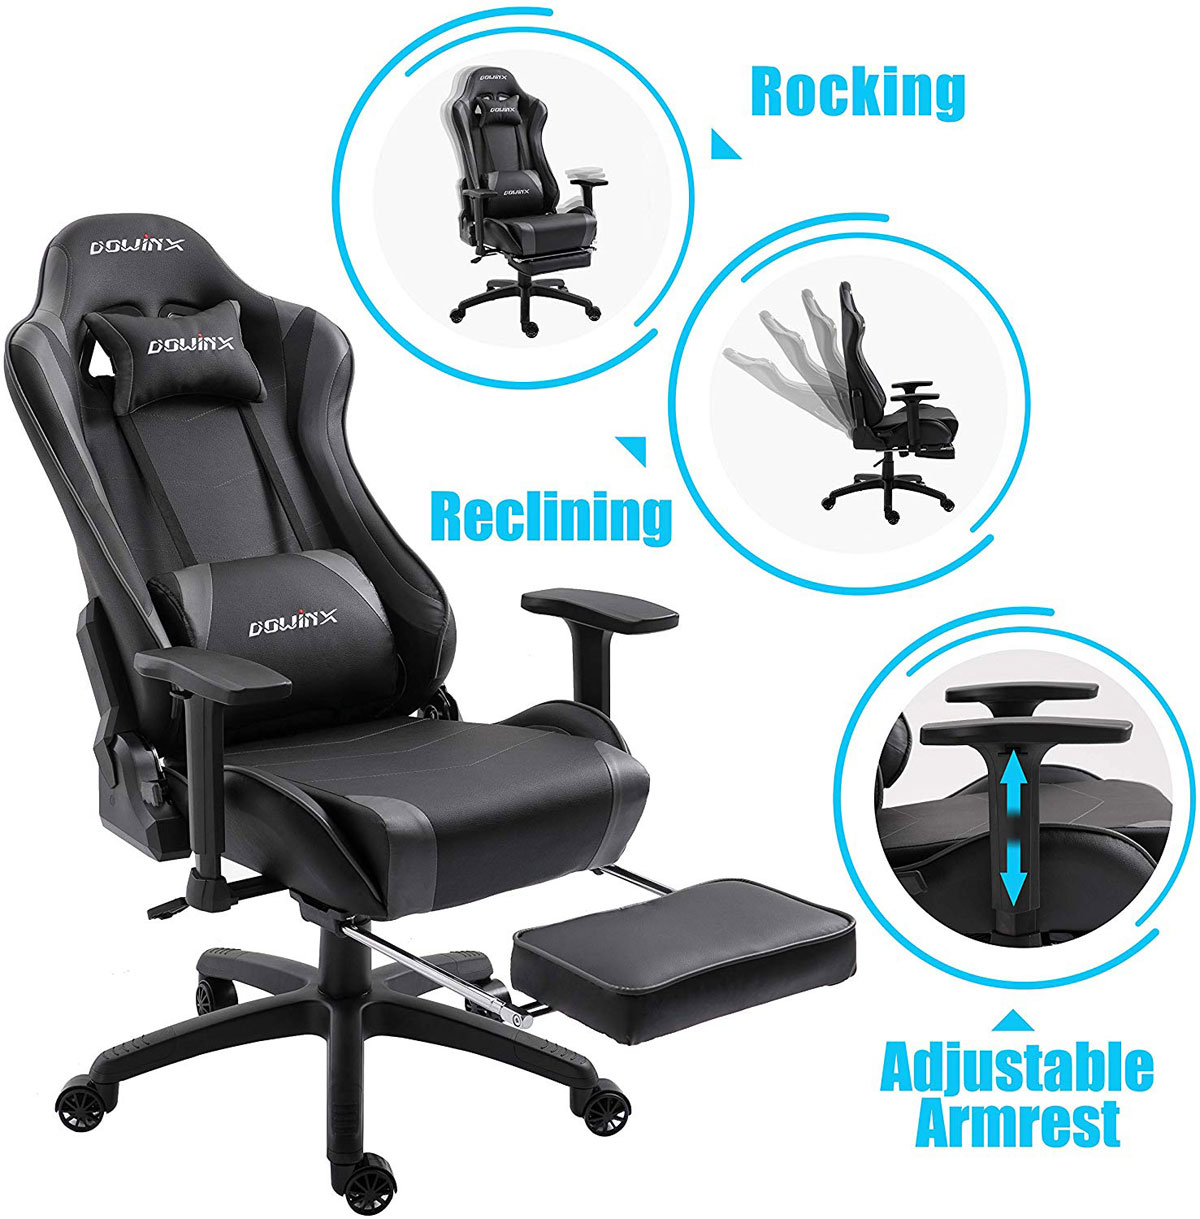 Dowinx Gaming Chair Ergonomic Office Recliner For Computer With Massage Lumbar Support Racing Style Armchair Pu Leather E Sports Gamer Chairs With Retractable Footrest Black Grey Newegg Com